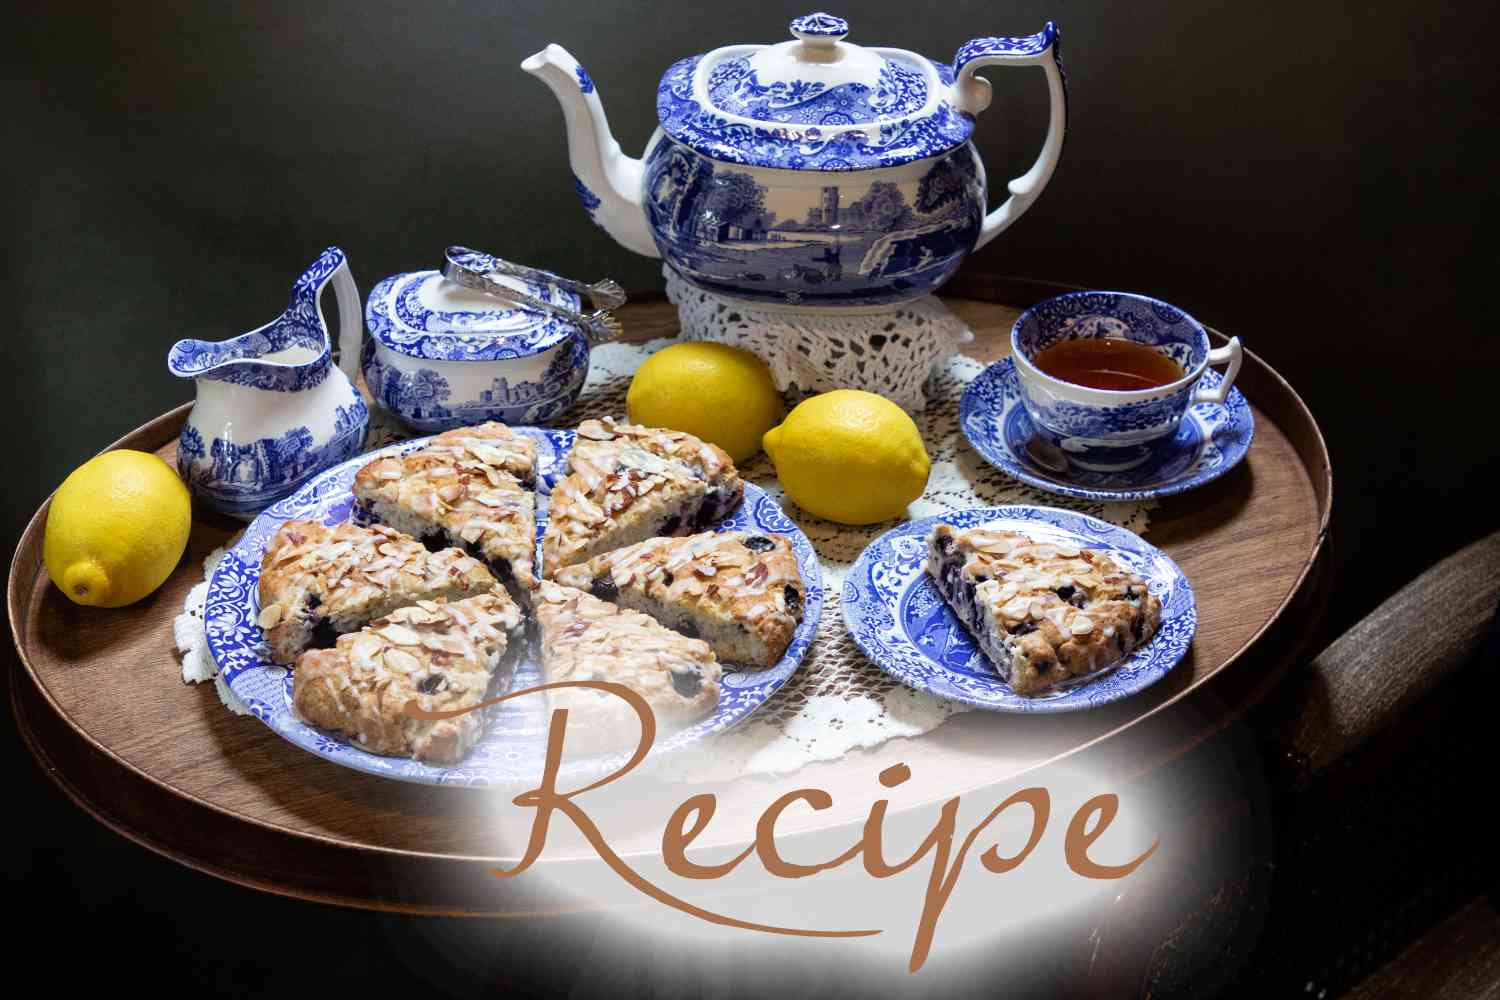 Gluten-free Blueberry Almond Scone - Afternoon Tea Scones Recipes With Tea